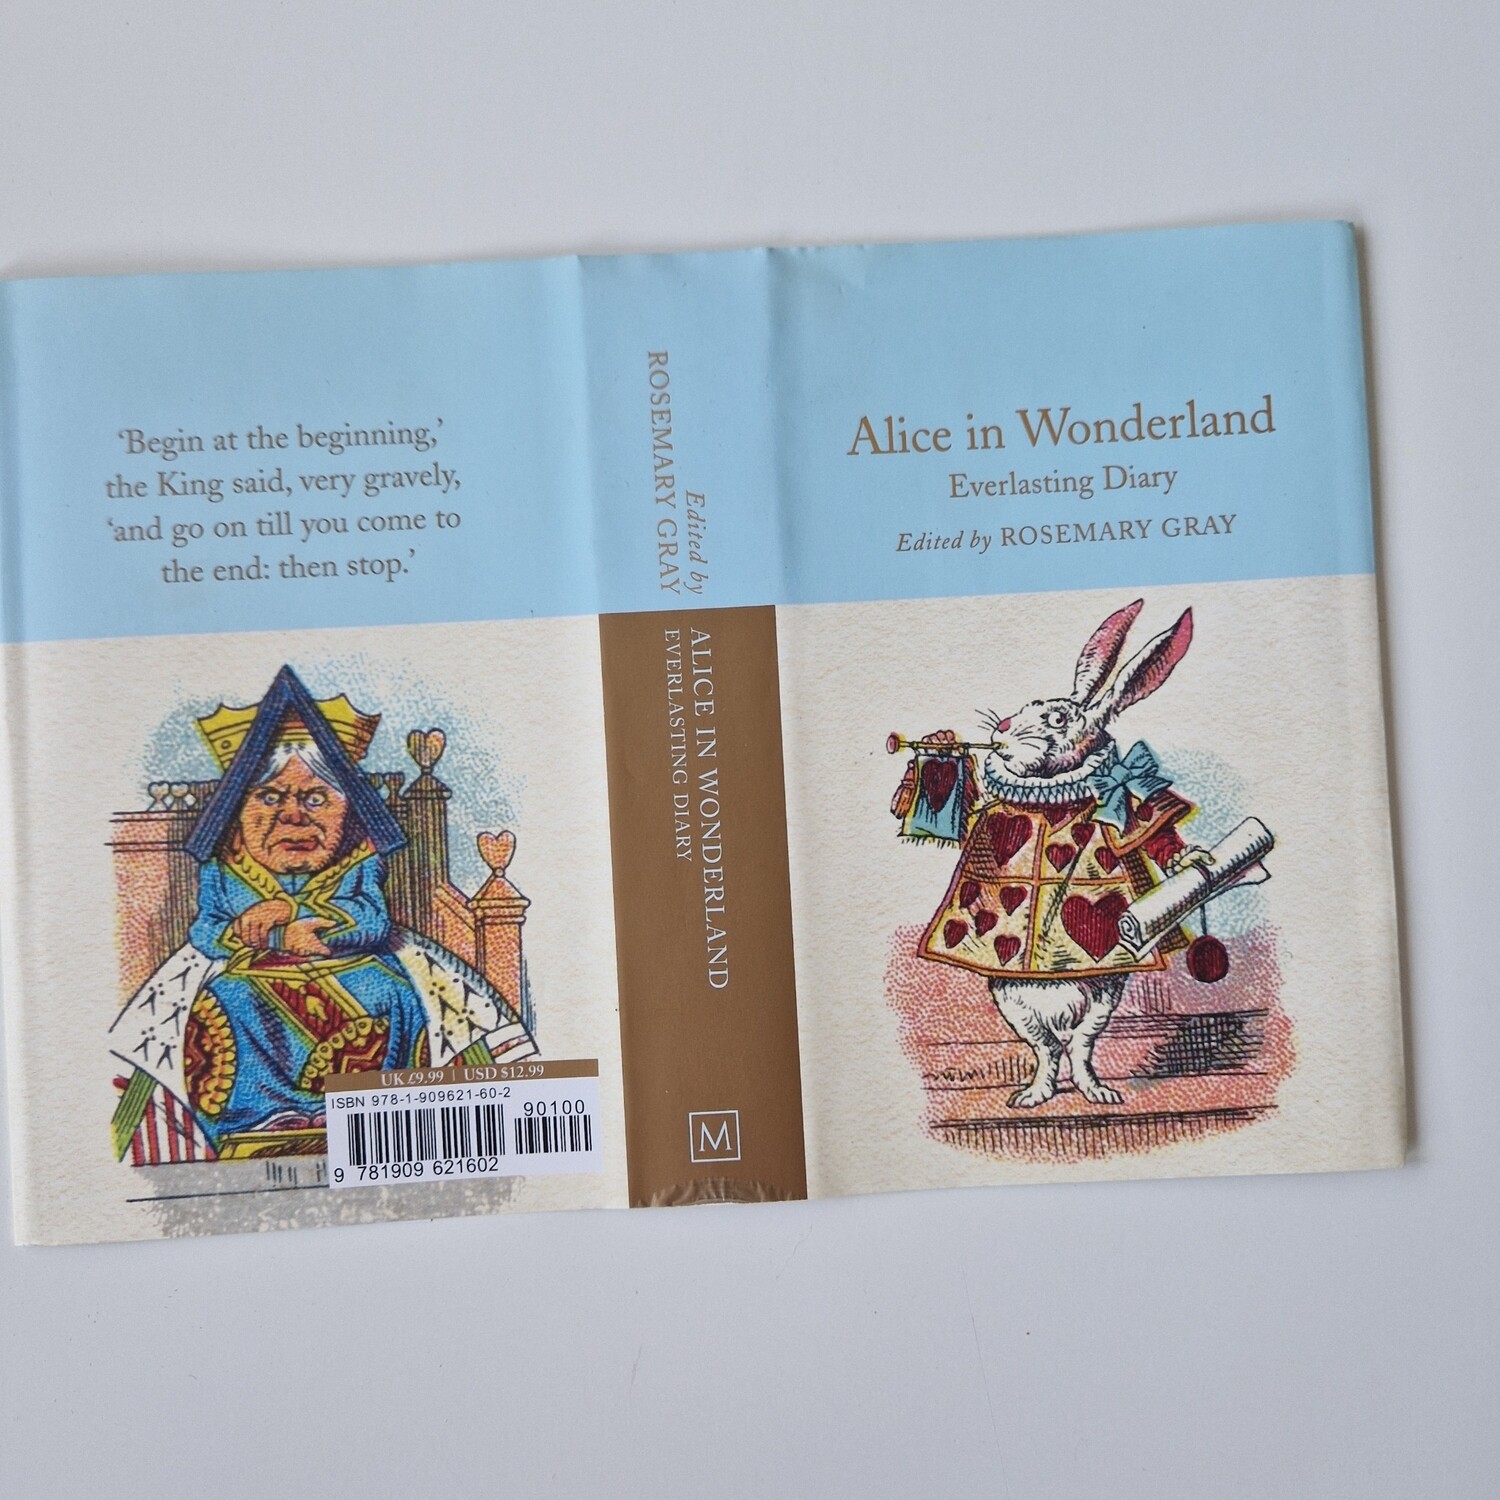 Alice in Wonderland Everlasting Diary - made from a dust jacket